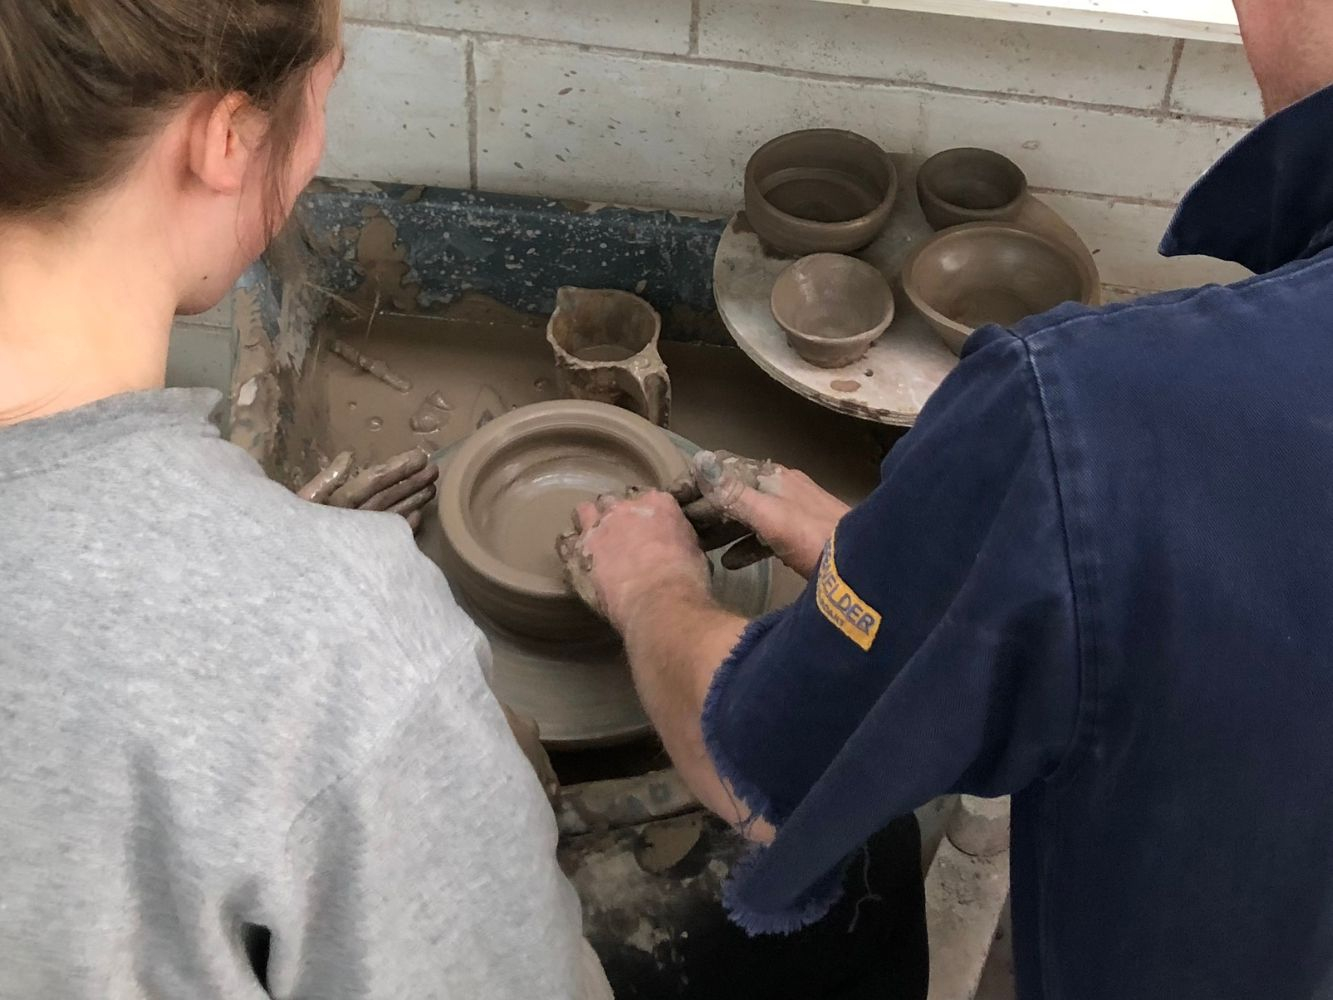 Two people doing pottery